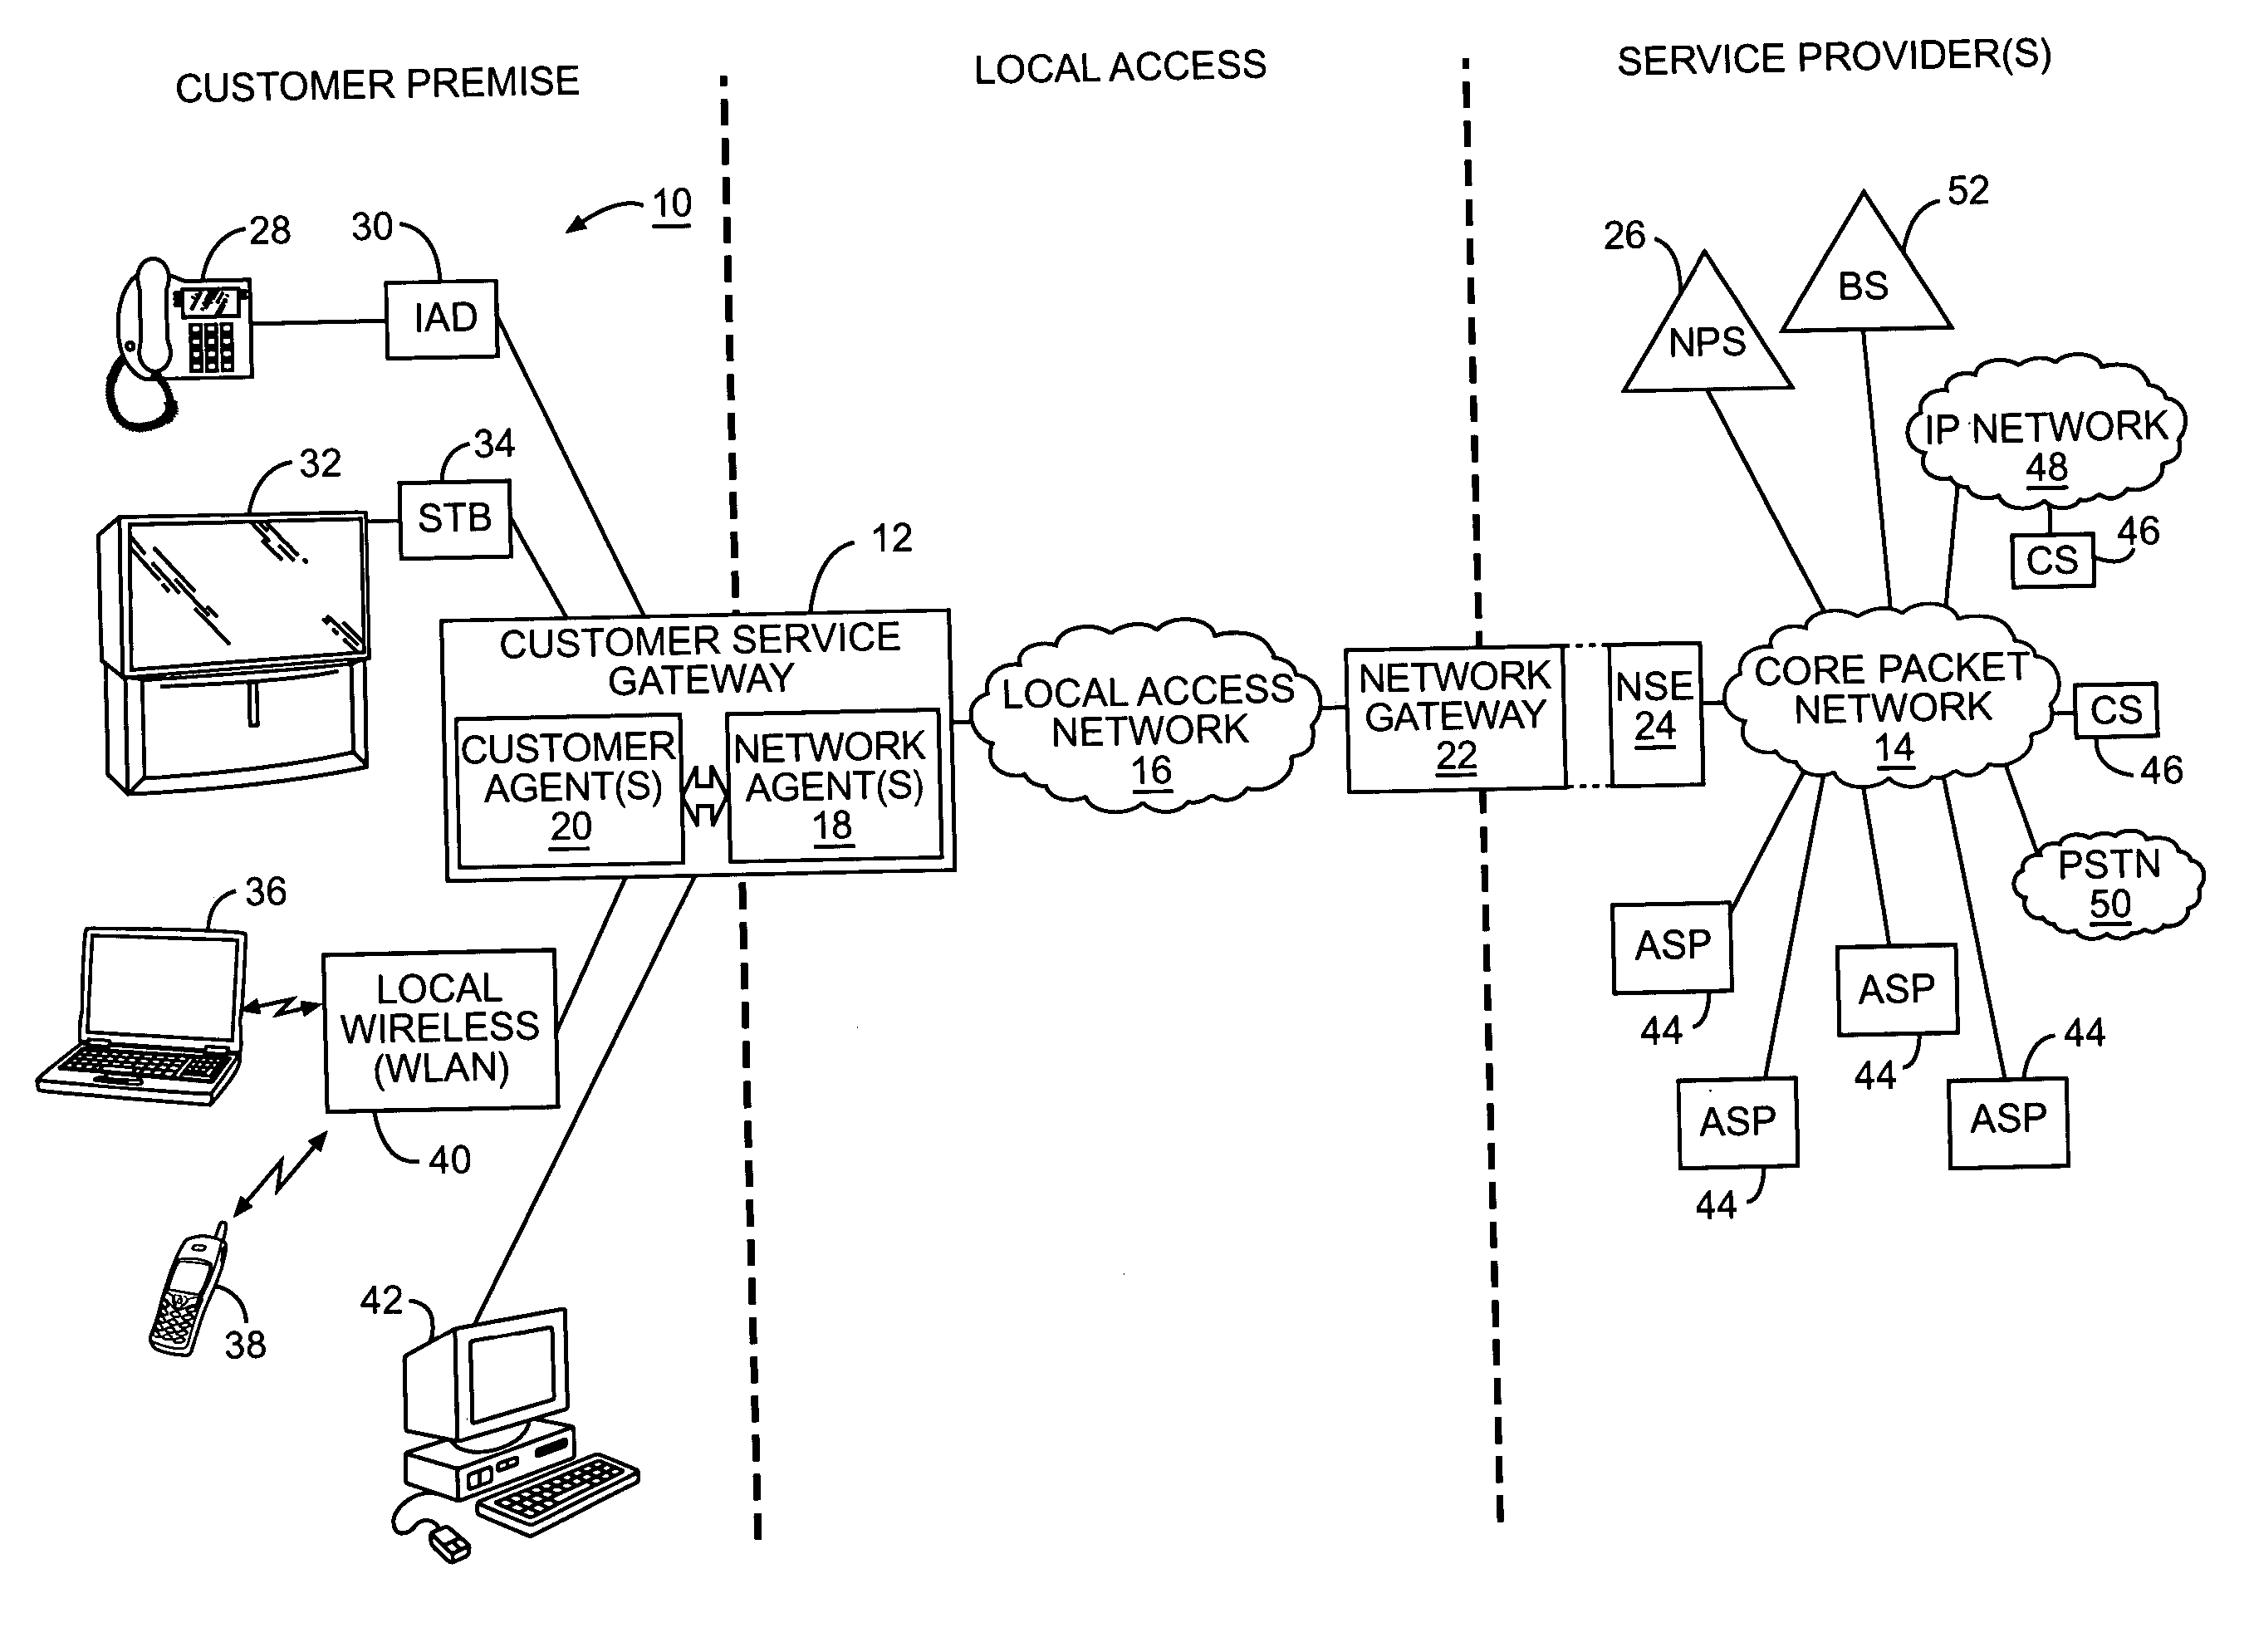 Network controlled customer service gateway for facilitating multimedia services over a common network